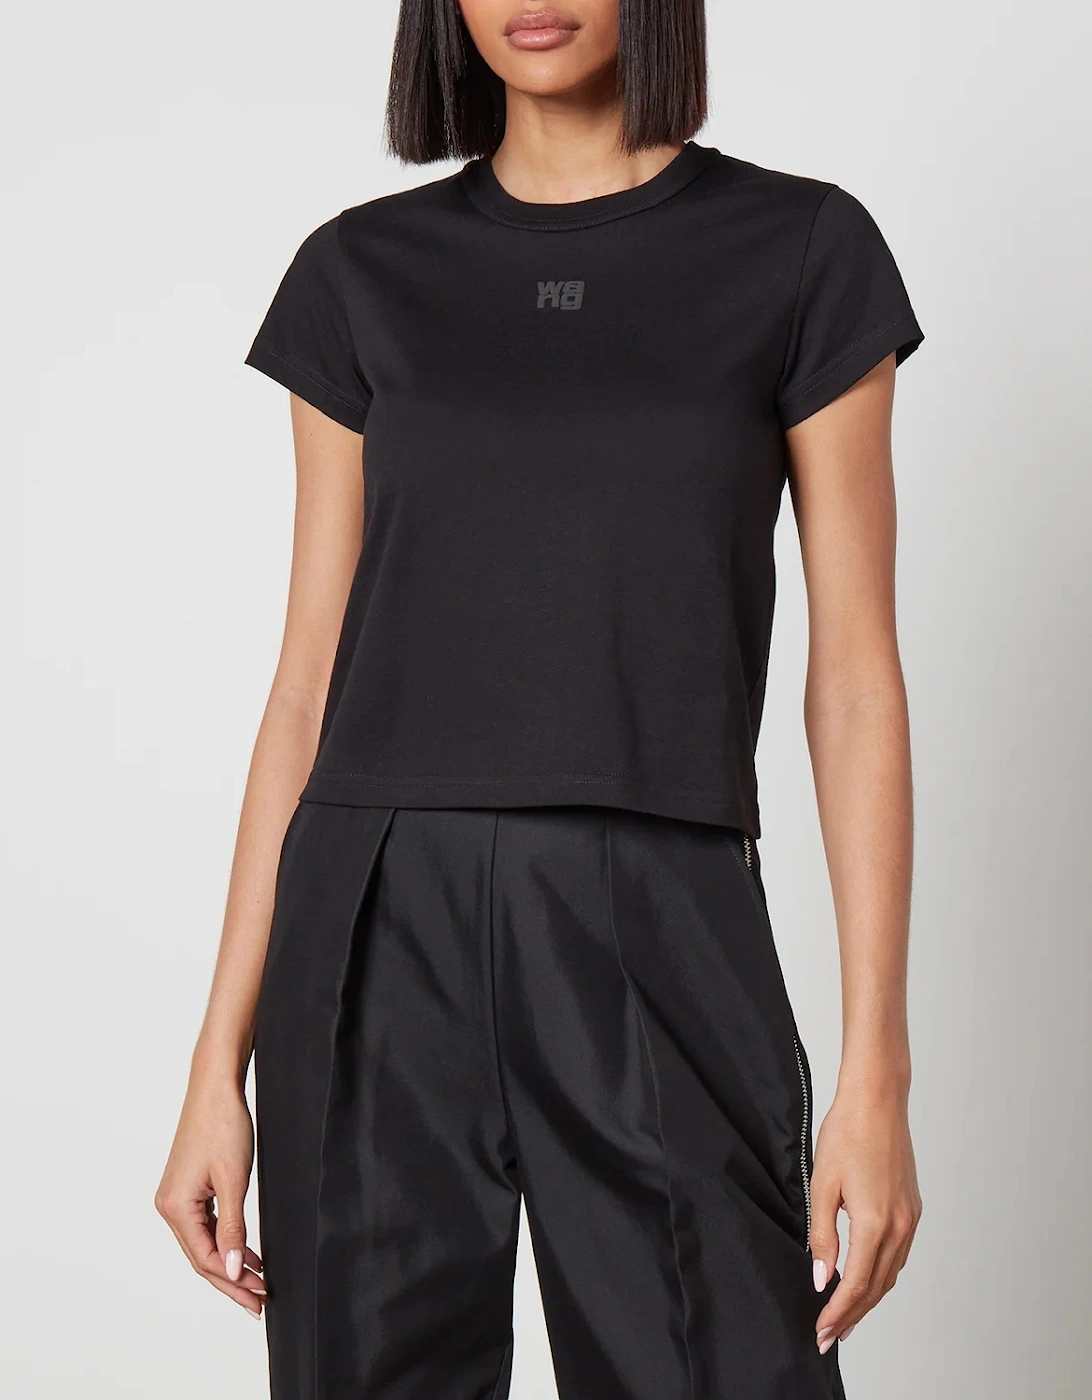 Alexander Wang Women's Essential Jersey Shrunk Tee With Puff Logo And Bound Neck - Black - - Home - Alexander Wang Women's Essential Jersey Shrunk Tee With Puff Logo And Bound Neck - Black, 2 of 1